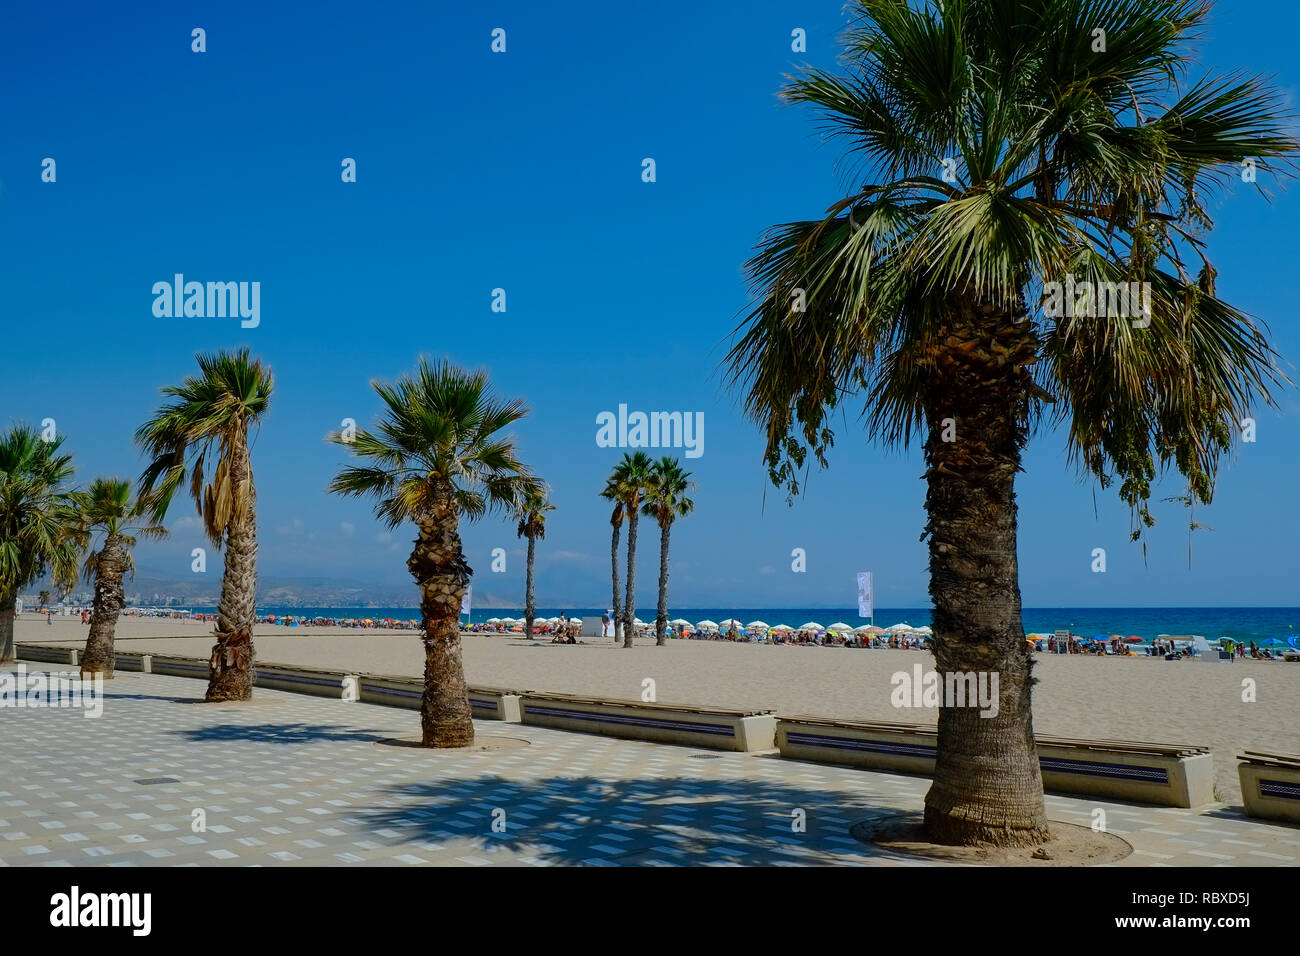 View from the esplanade towards the busy beach front. August weekend. Playa San Juan, Alicante. Spain Stock Photo